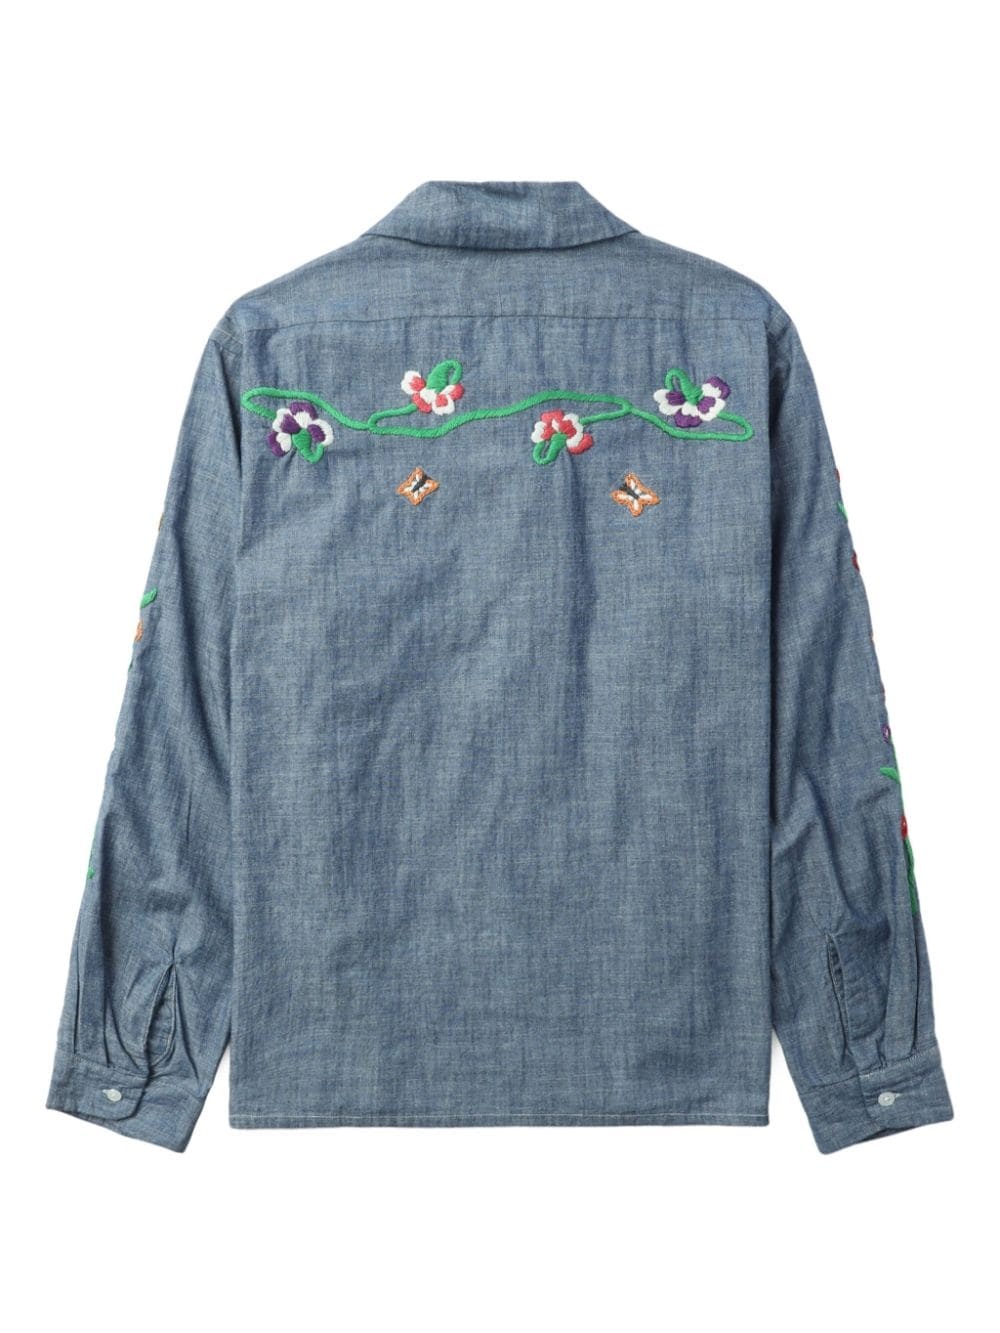 embroidered western shirt - 6